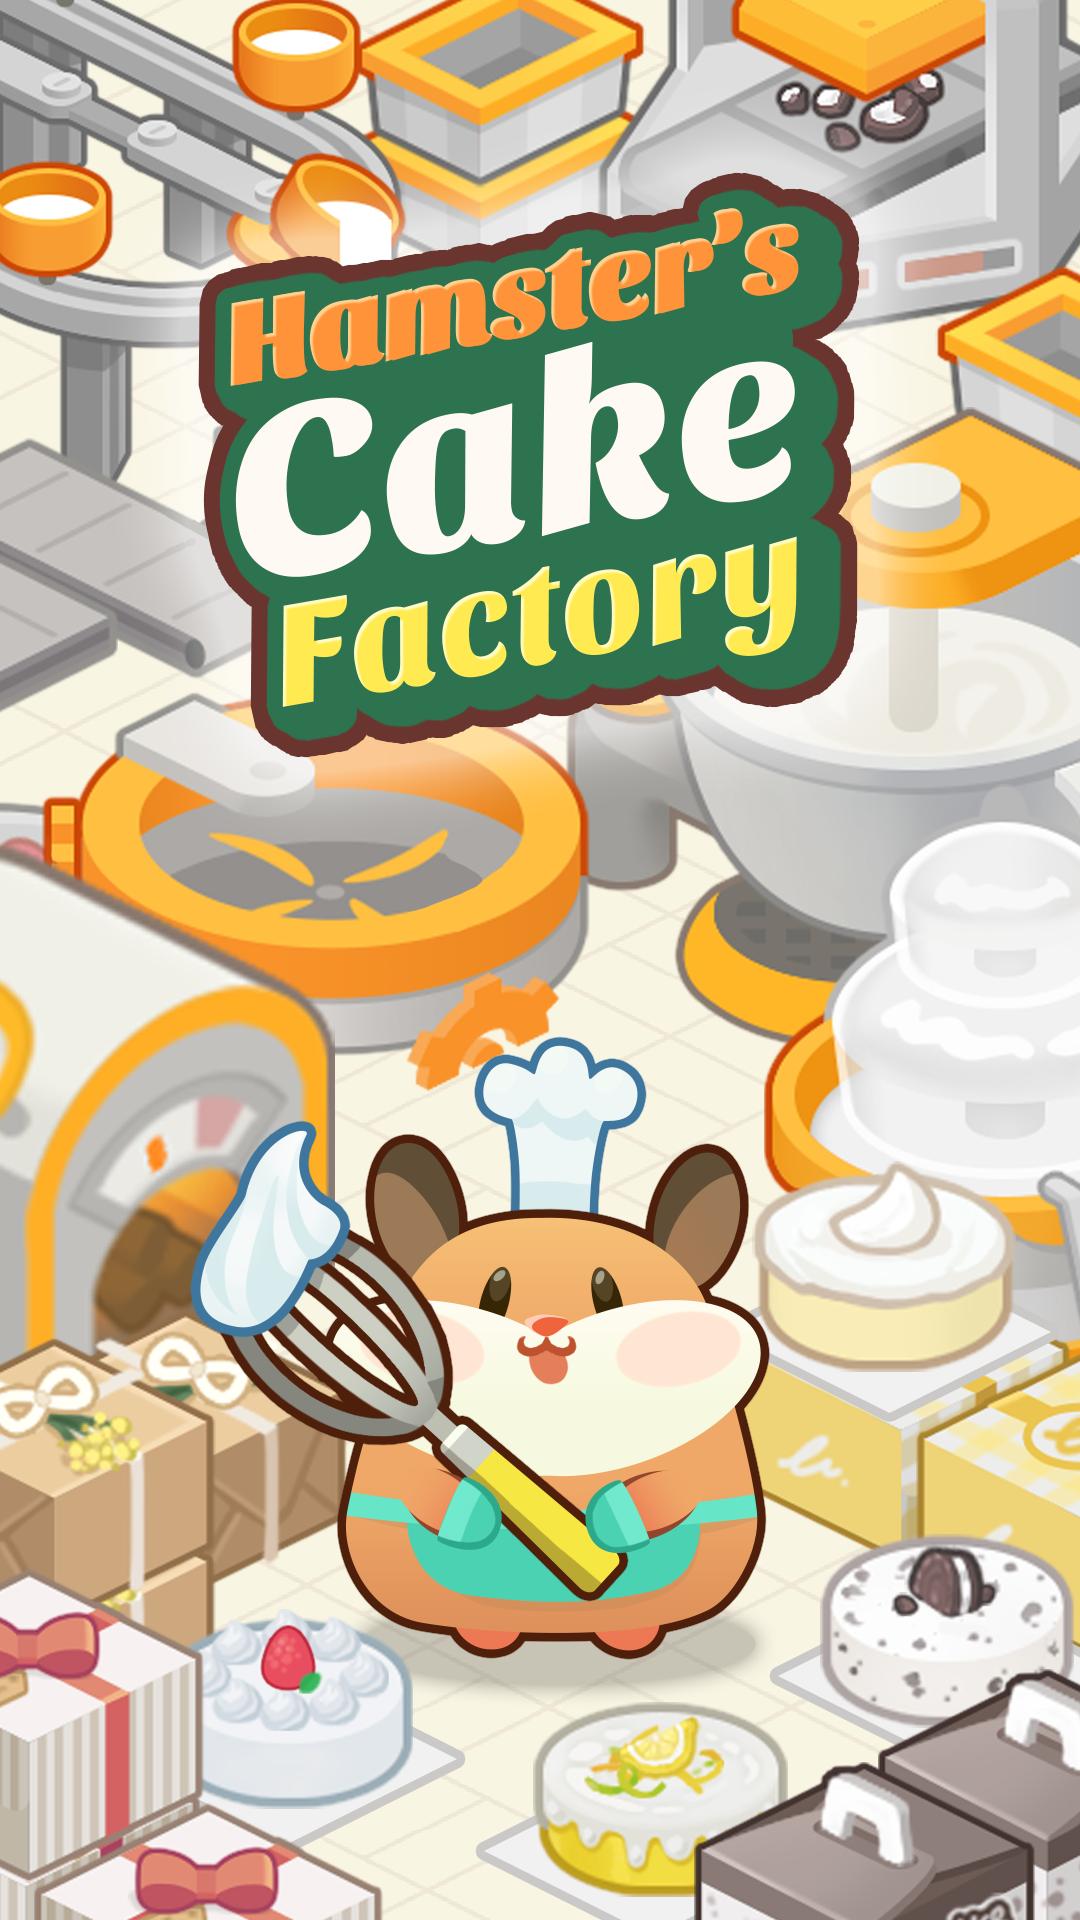 Hamster's Cake Factory - Idle Baking Manager 1.0.2 Screenshot 16